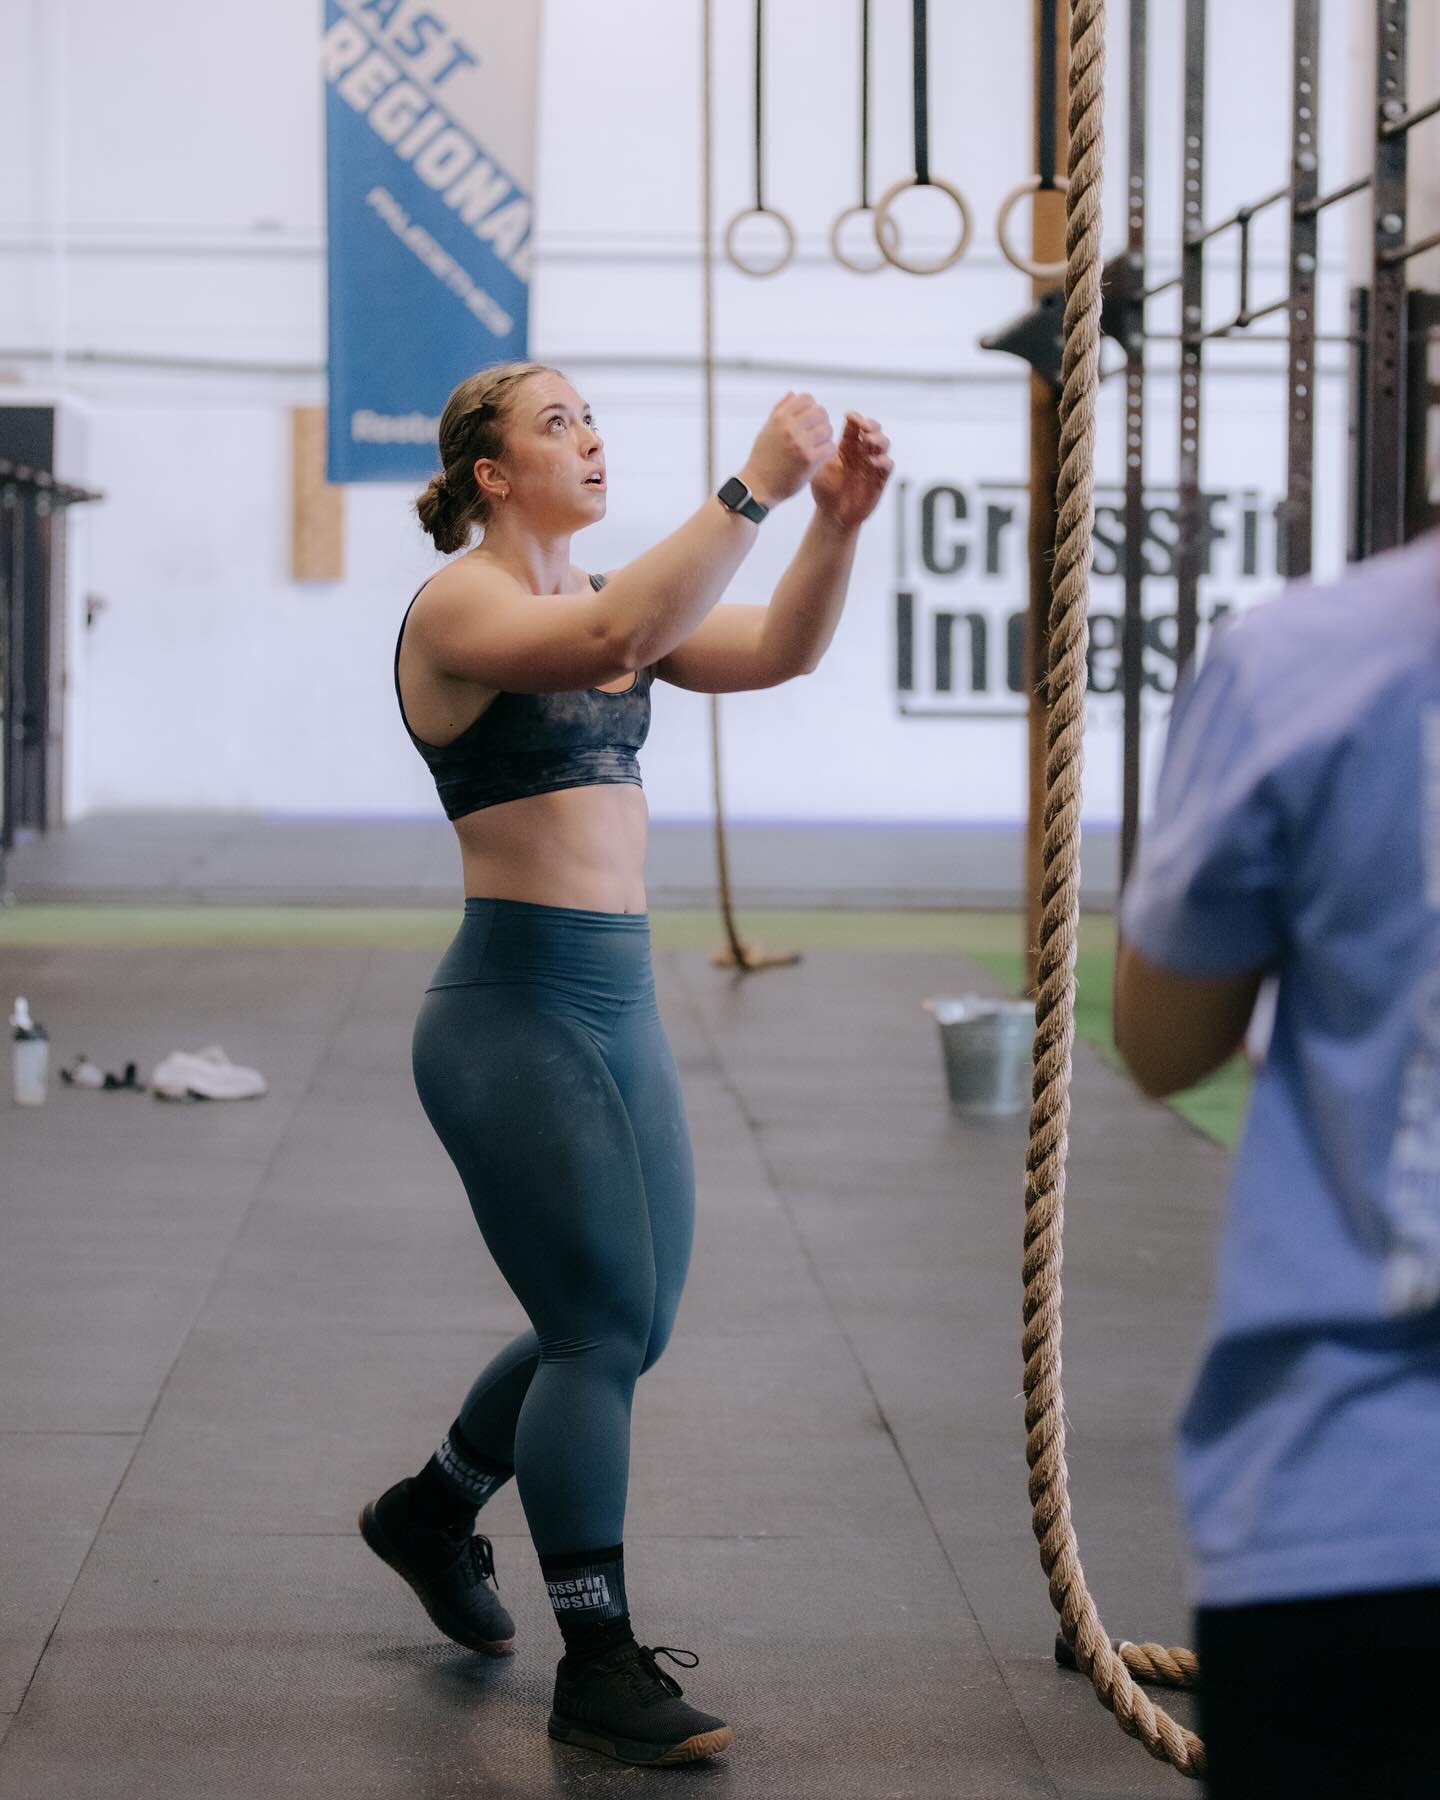 The quality of the results you get from the CrossFit program are directly related to the quality of the effort that you put in.

* You have to turn up regularly
* You have to try hard
* You have to have a positive attitude
* You have to be willing to